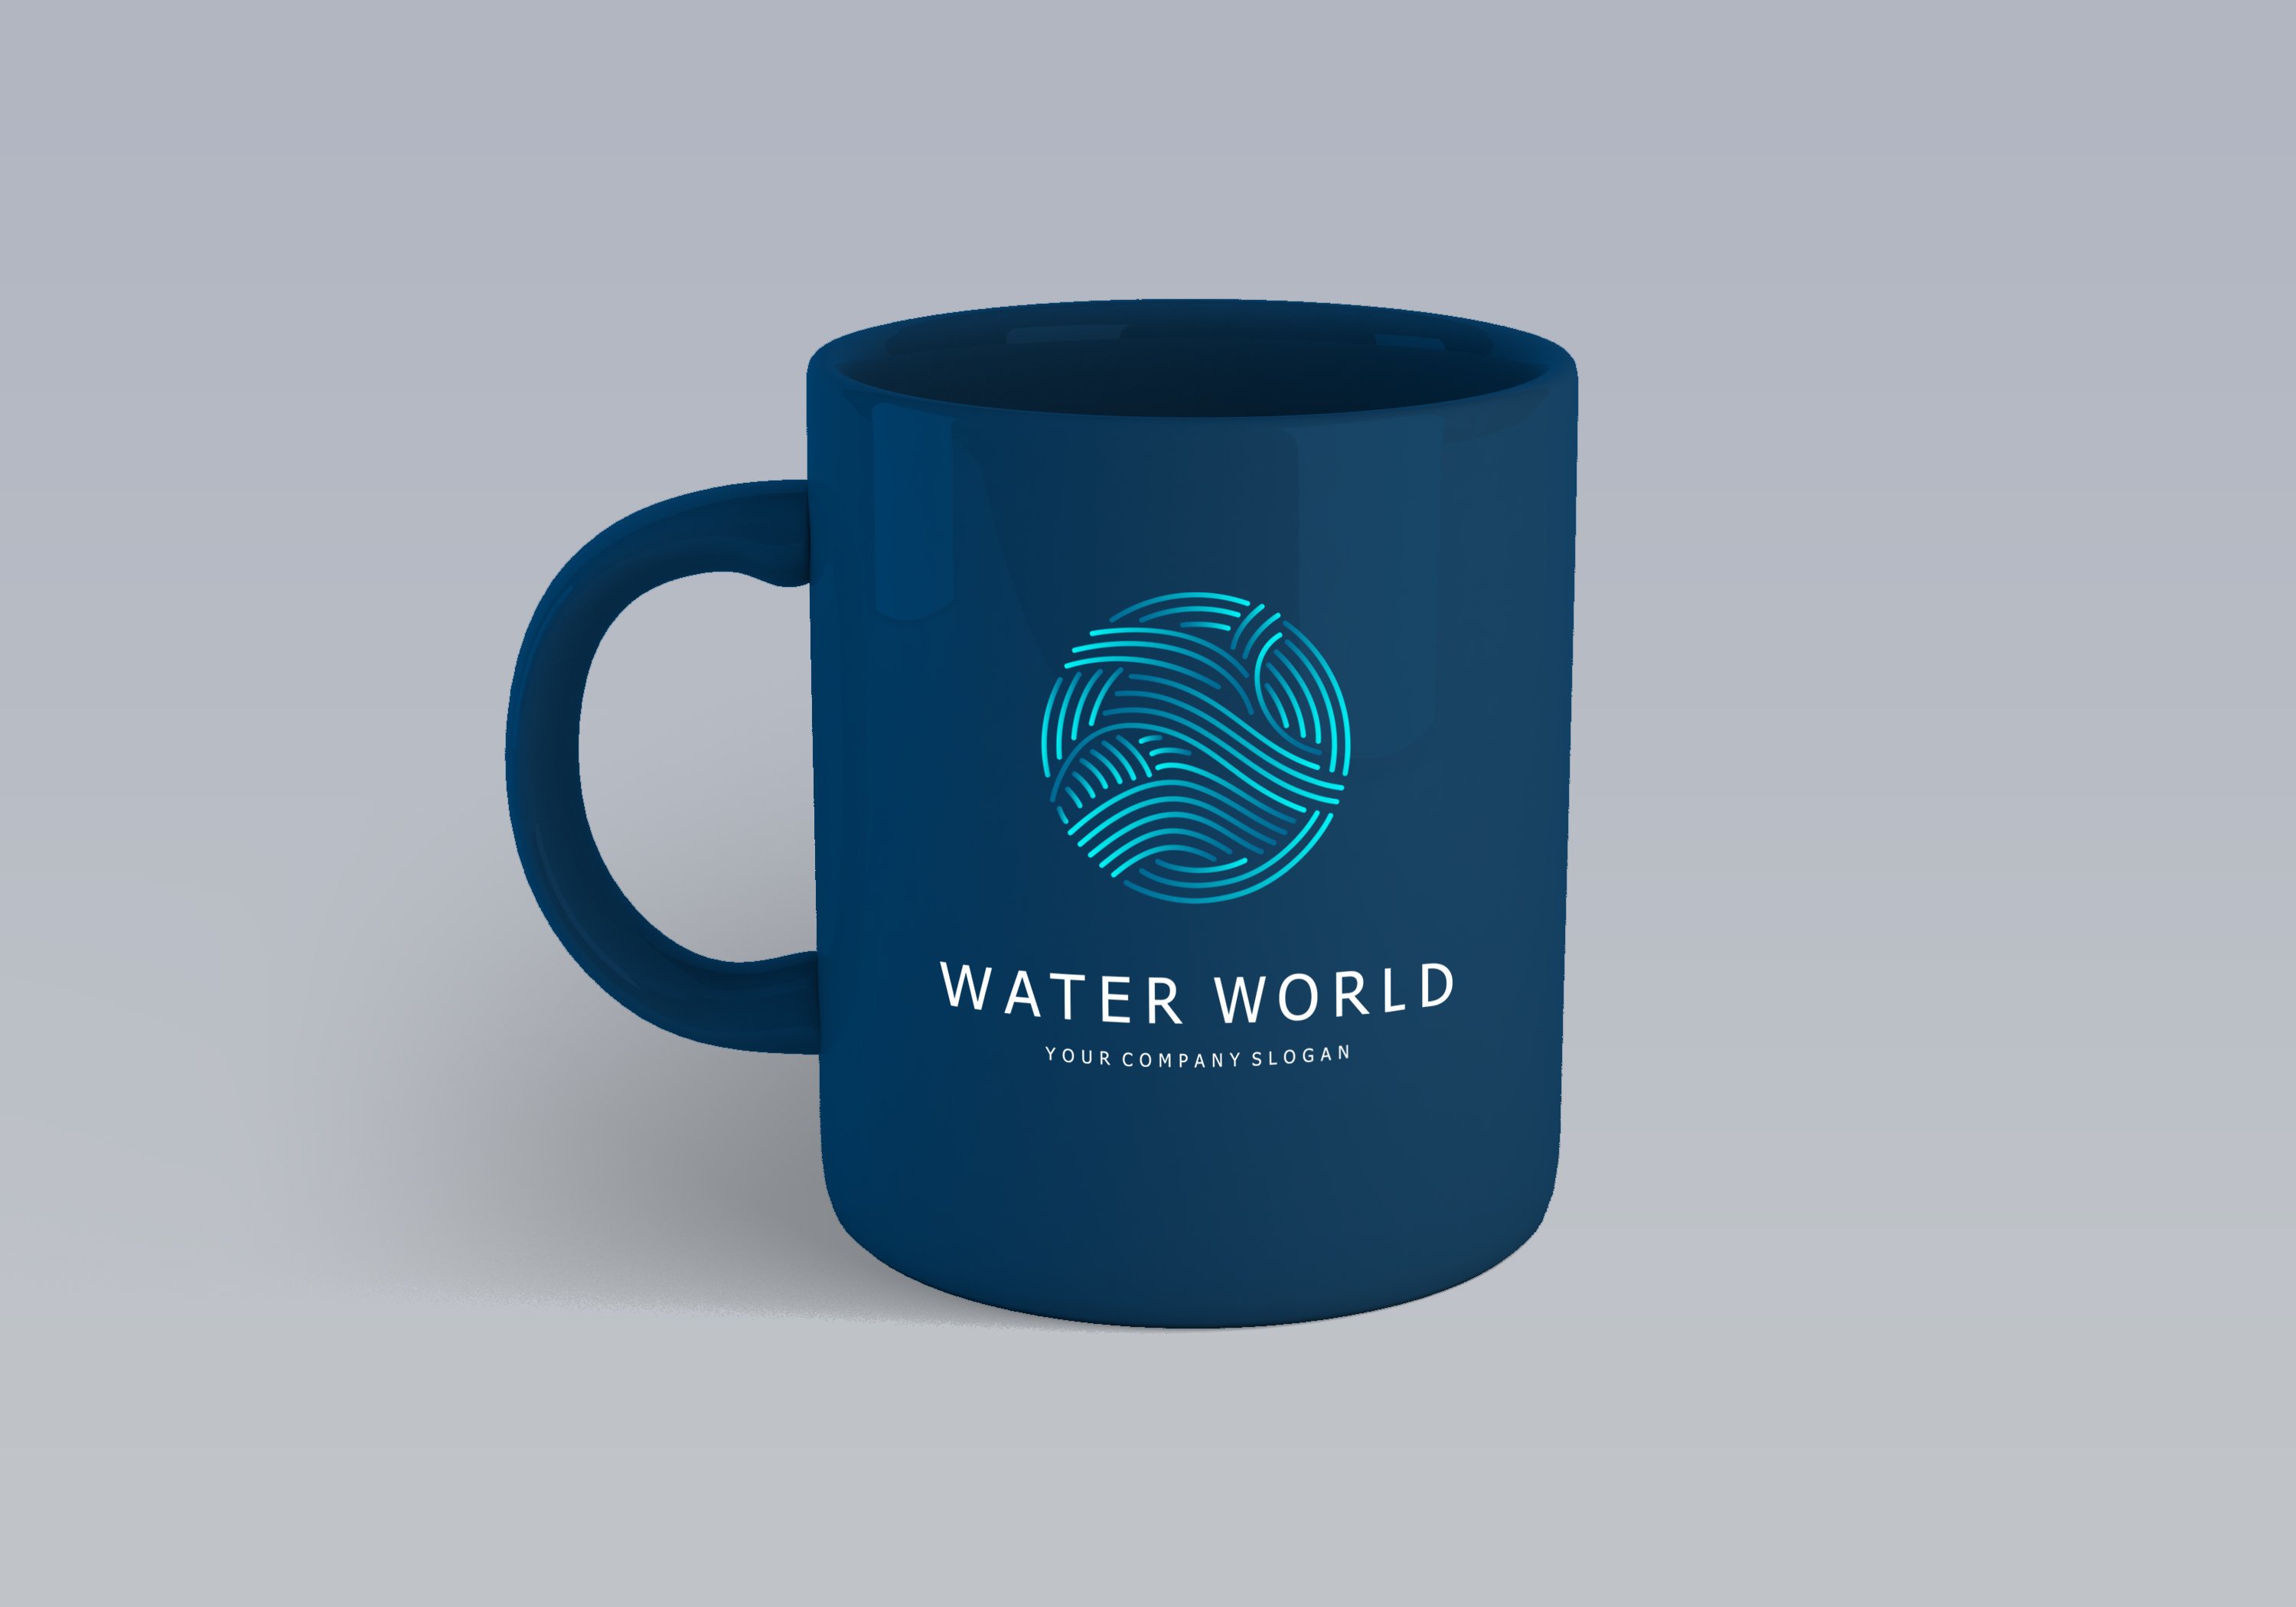 Cool big blue cup with wave logo.